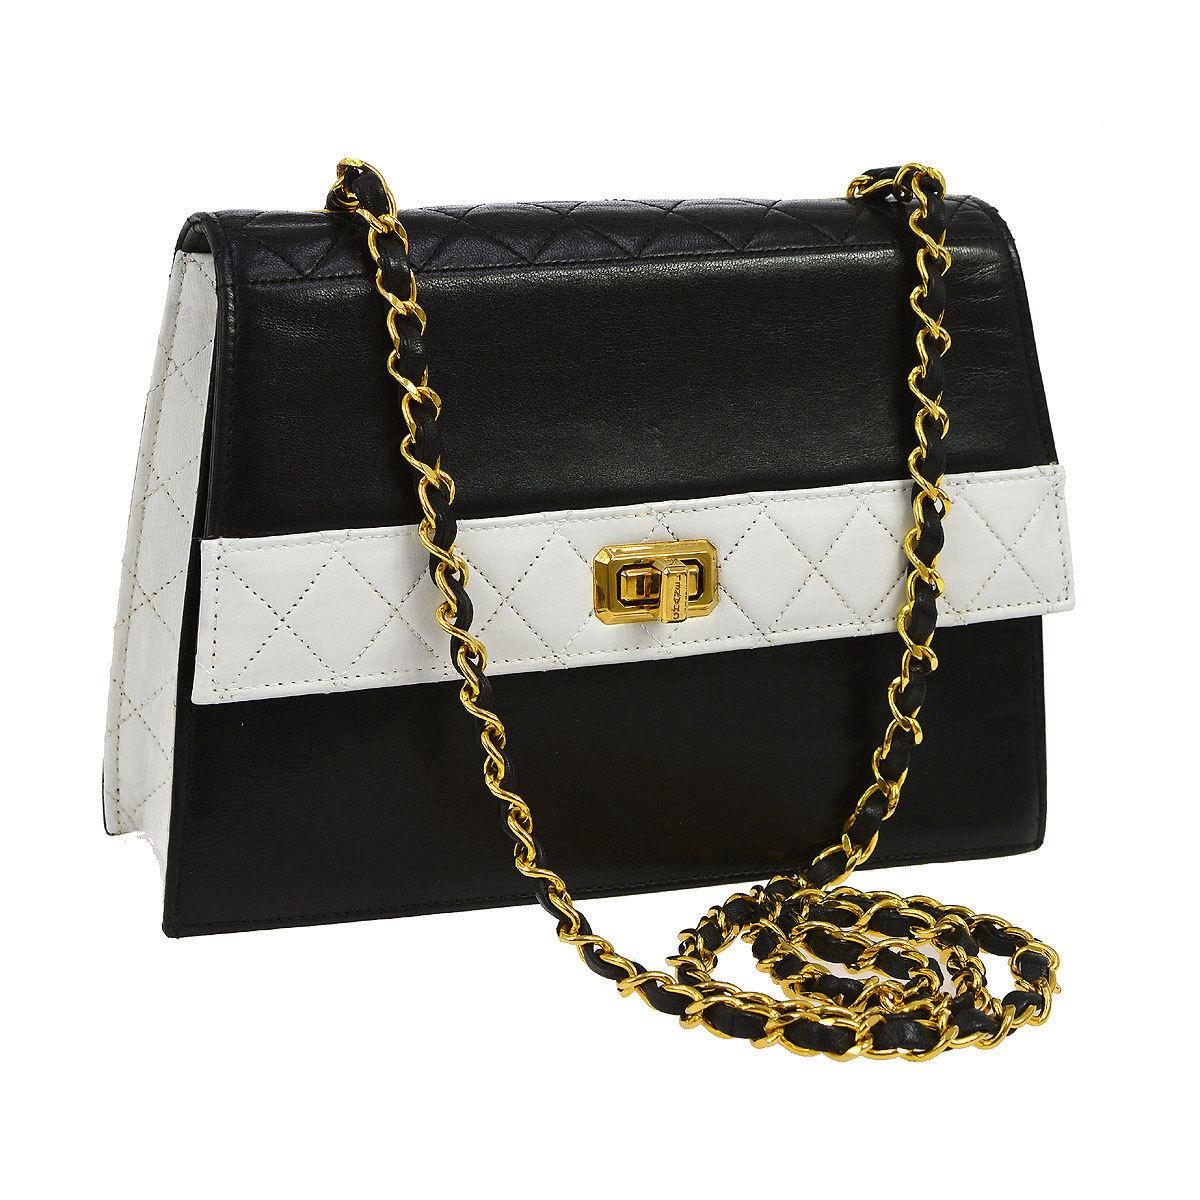 Chanel 1989 Two Tone Black and White Vintage Flap Bag For Sale 9